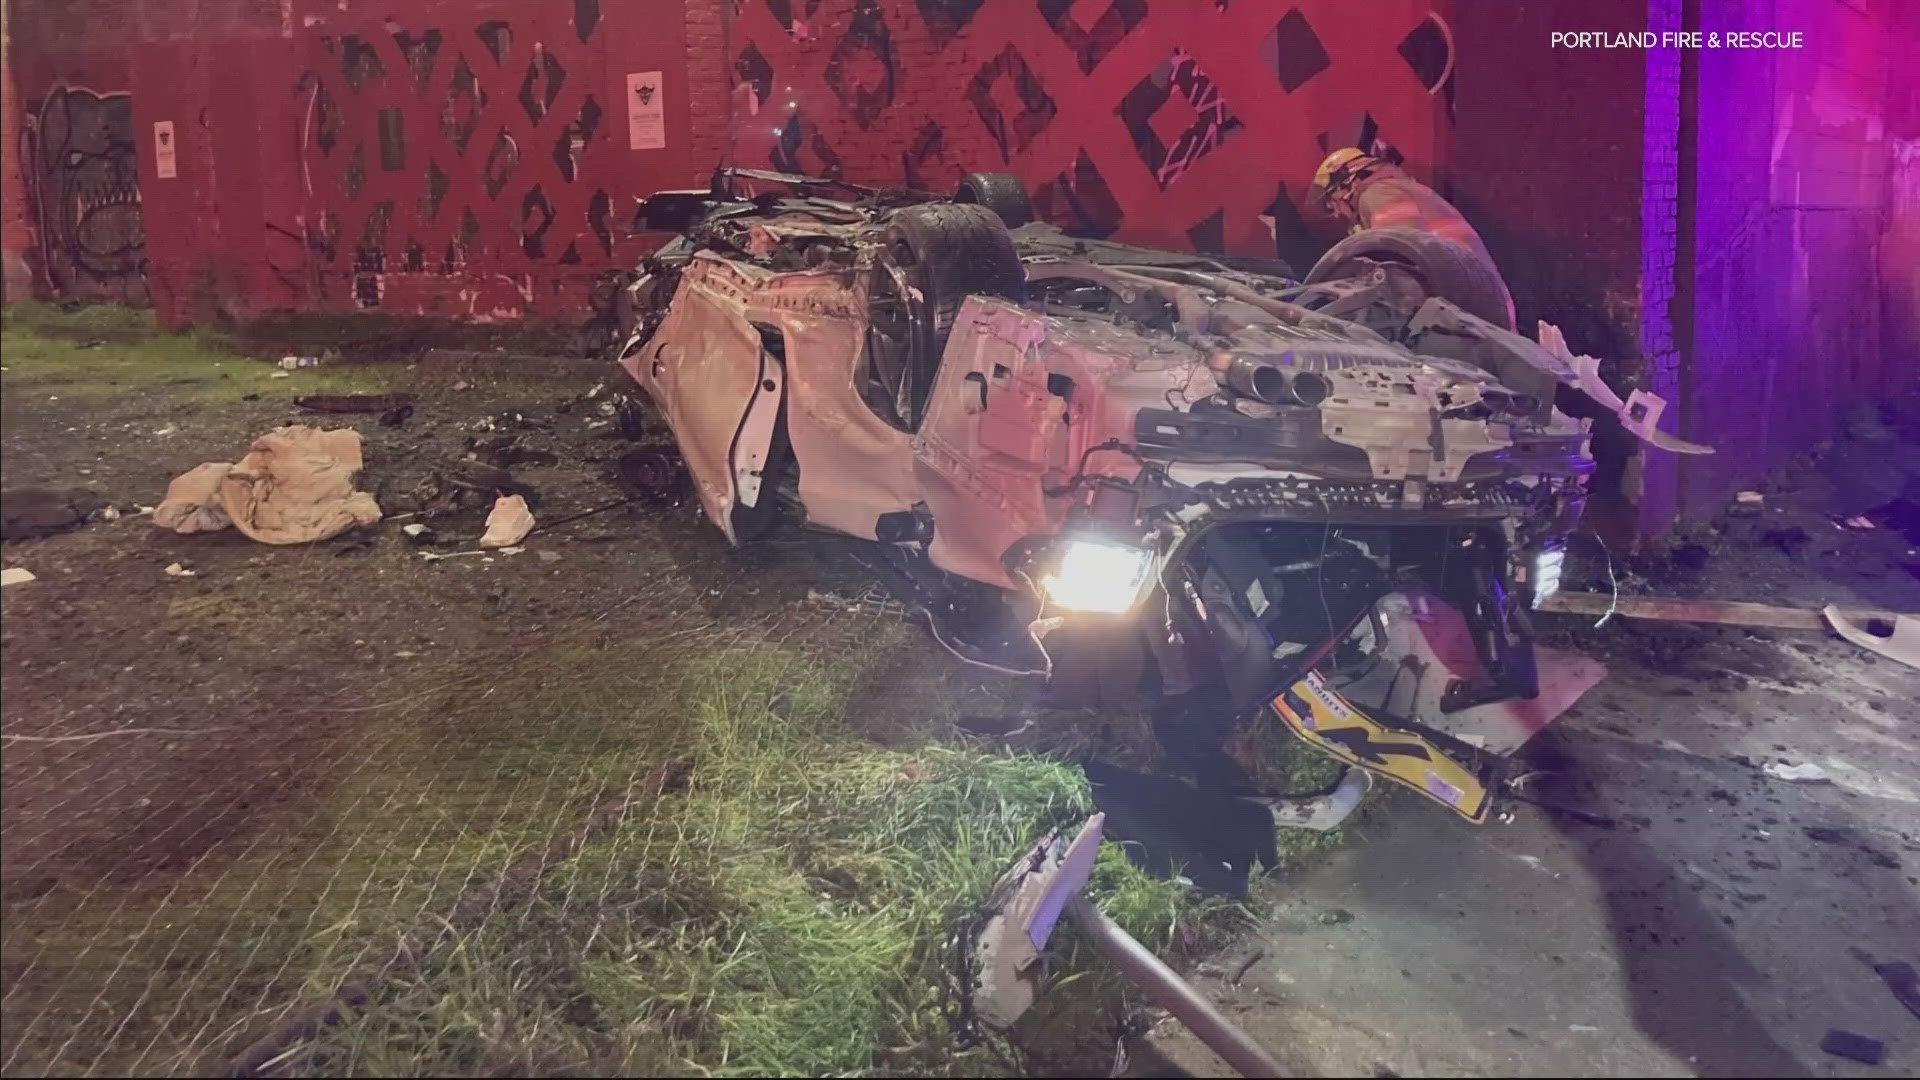 A man suffered only minor injuries after driving off the Interstate 5 south and falling 80 feet into the side of a building early Saturday morning.